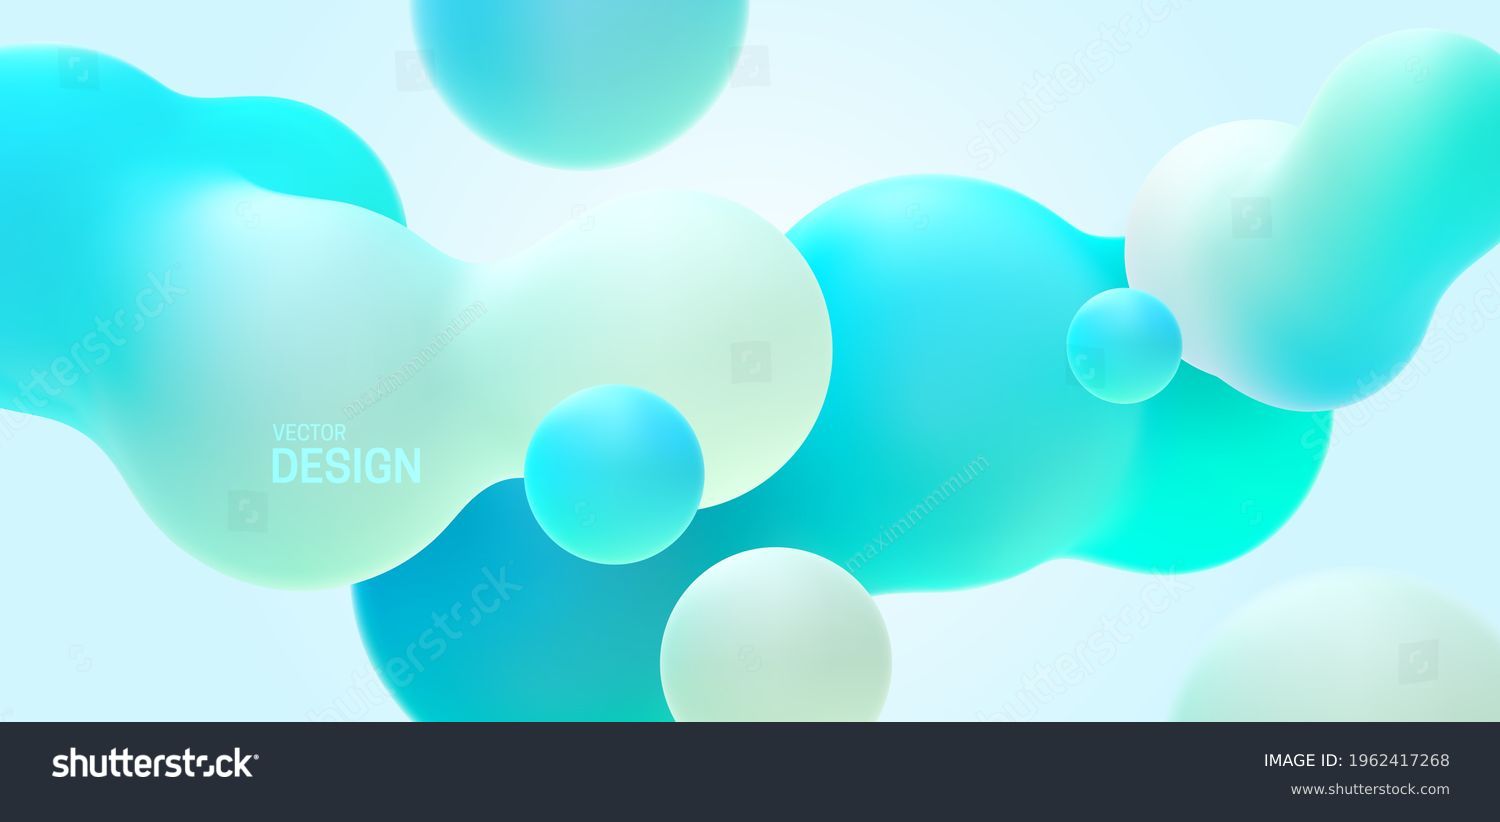 Gradient background with turquoise metaball shapes. Morphing colorful blobs. Vector 3d illustration. Abstract 3d background. Liquid colors. Banner or sign design #1962417268